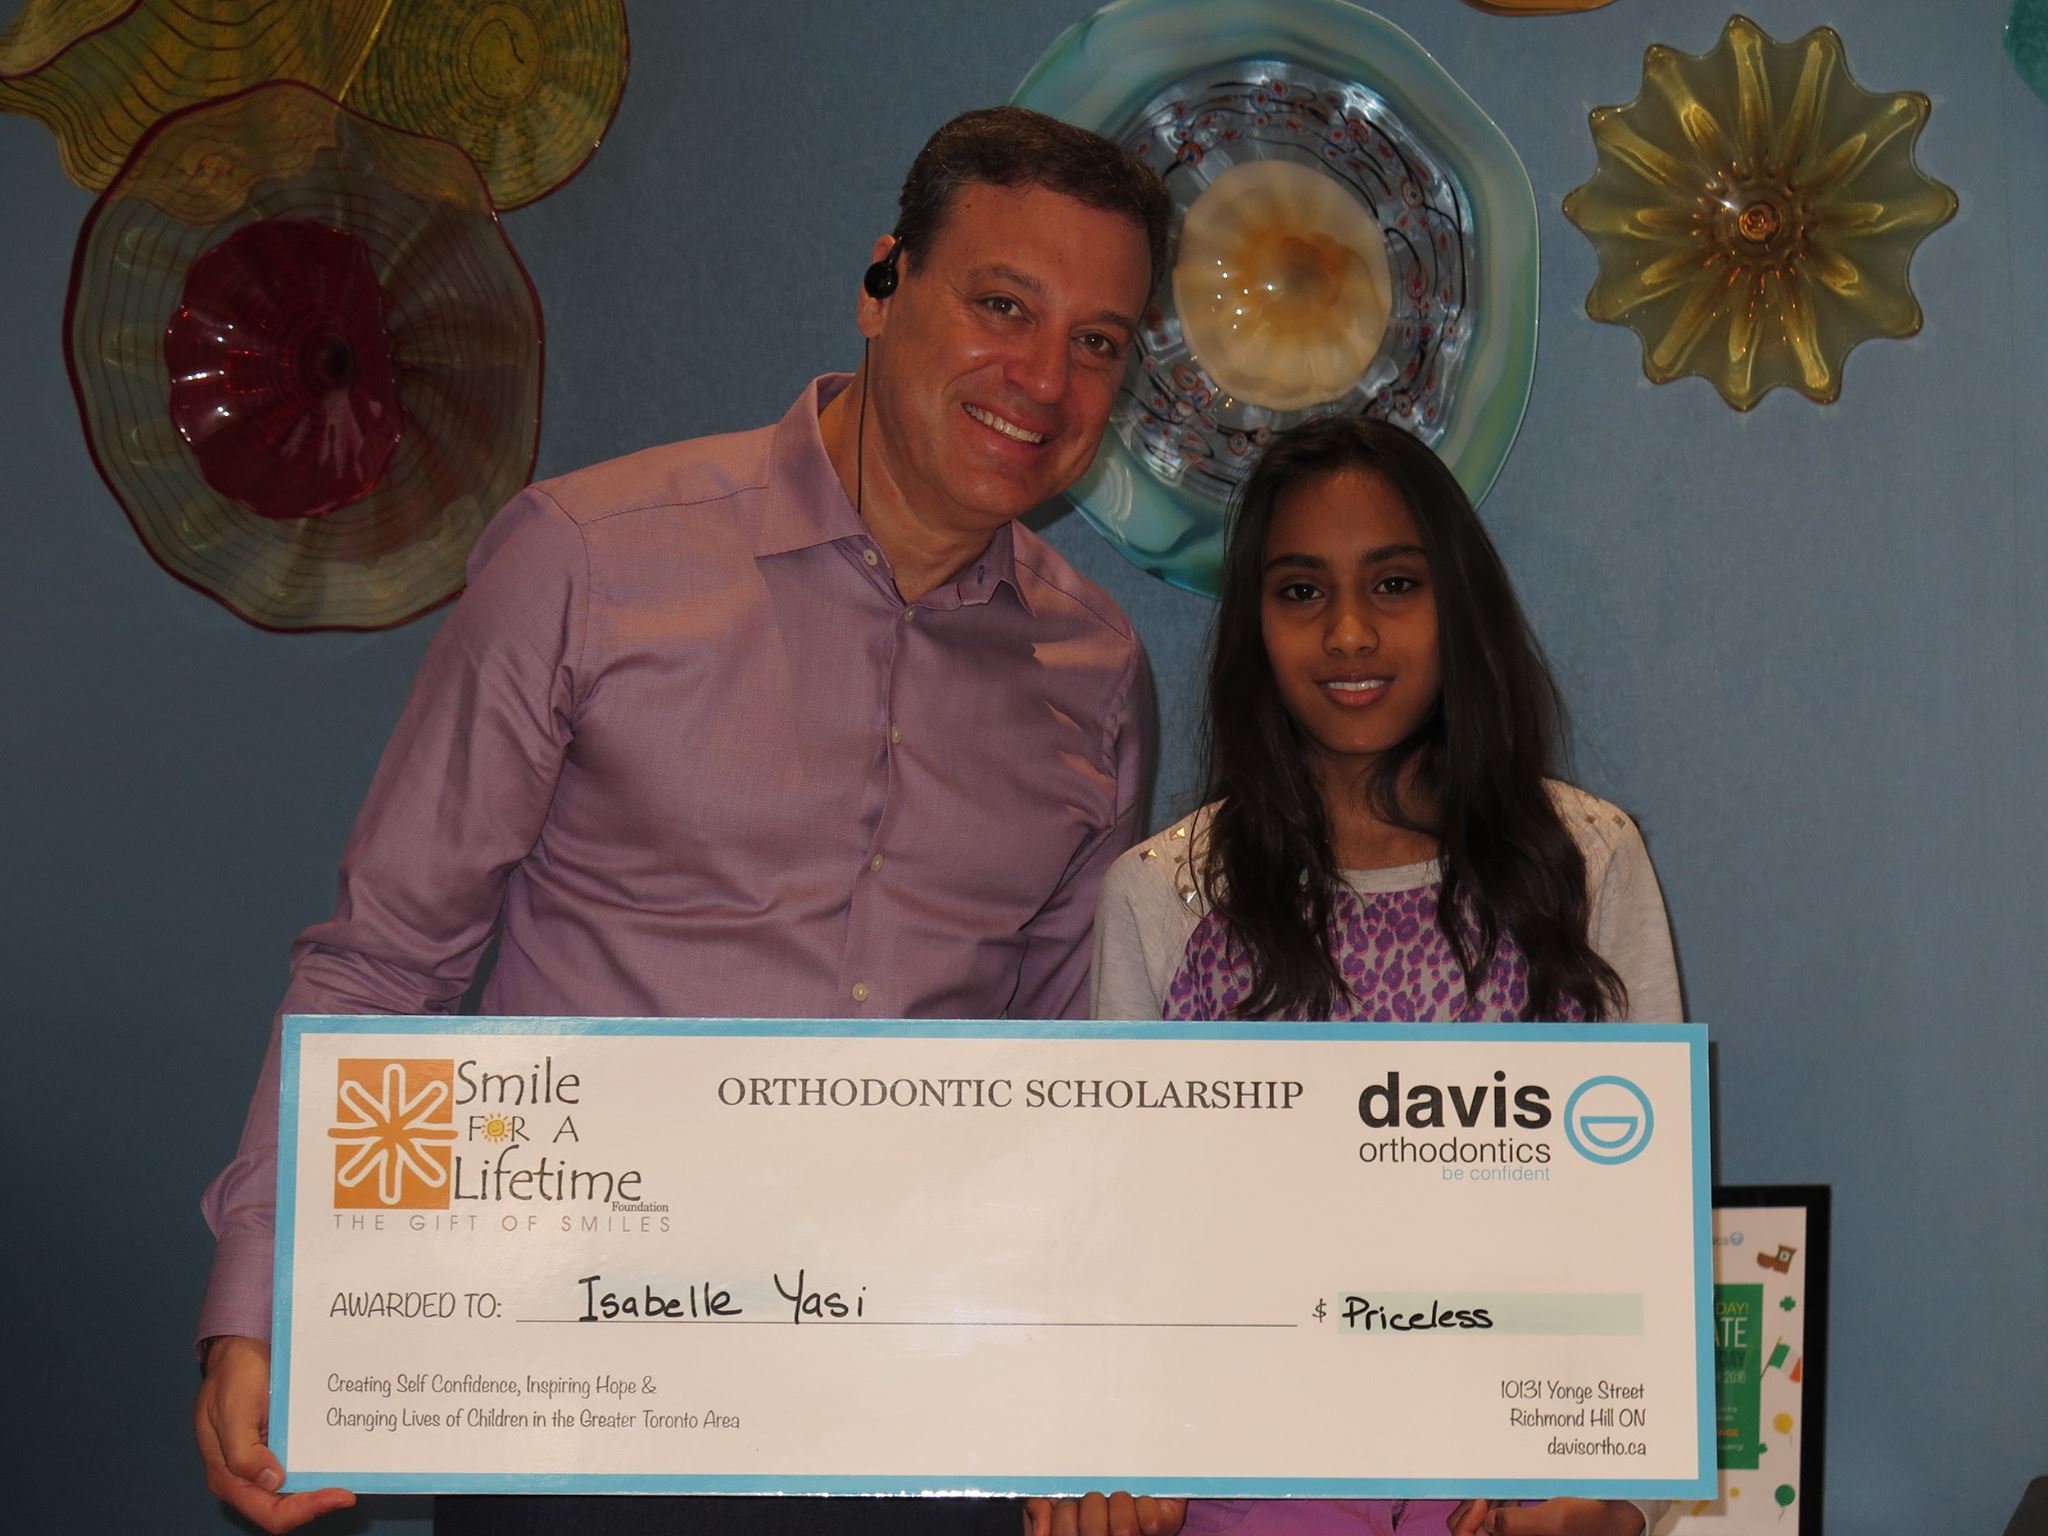 The team at Davis Orthodontics would like to congratulate Isabelle as one of our Smile For A Lifetime recipients! The doctors here are thrilled to be able to provide you with this award!